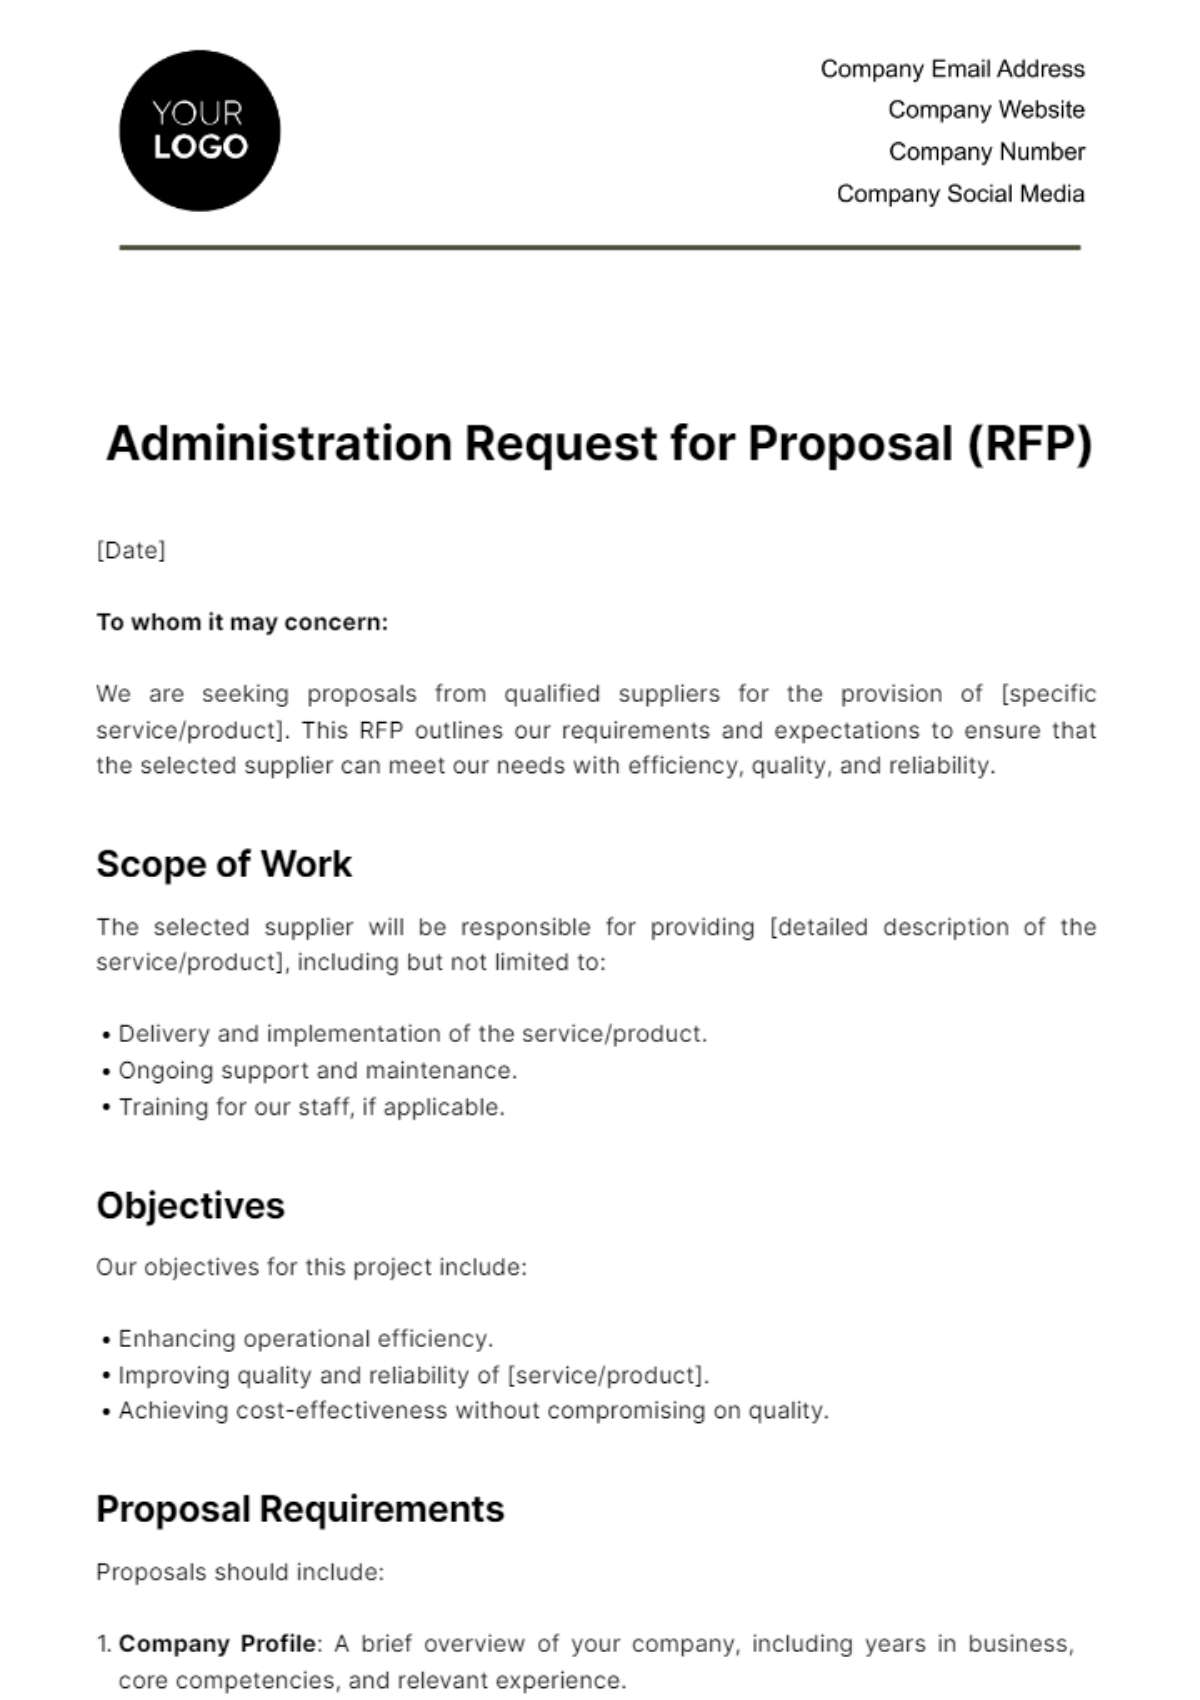 Free Administration Request for Proposal (RFP) Template